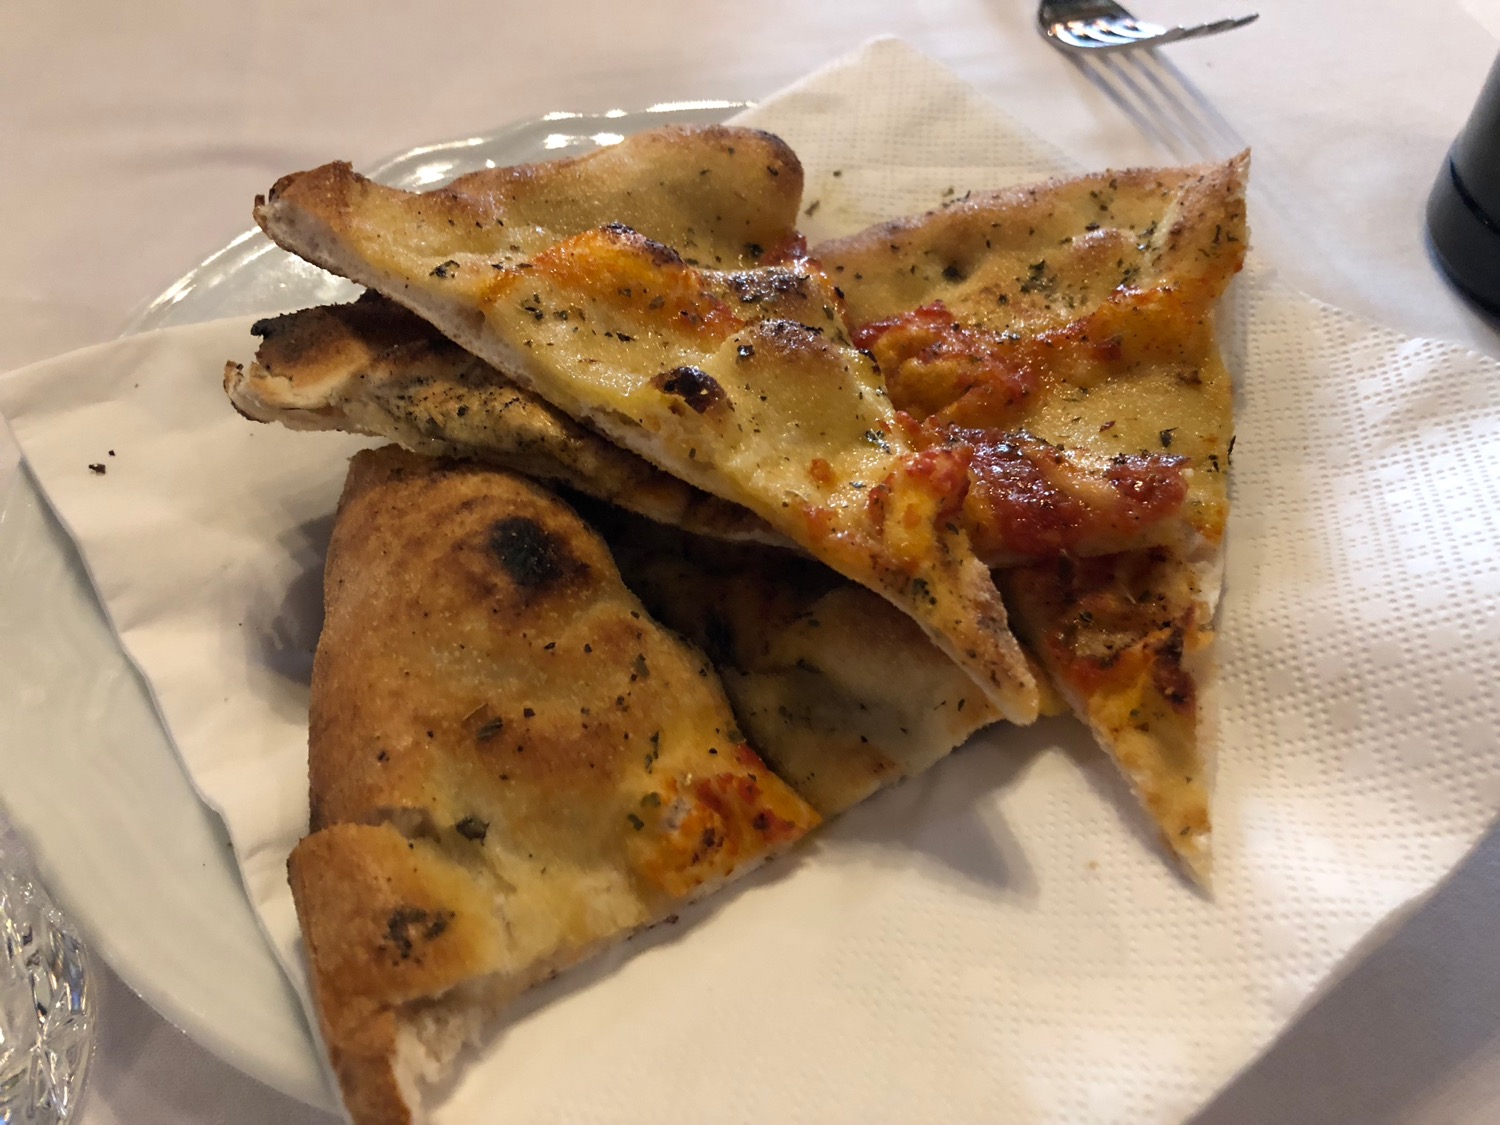 a plate of pizza on a table